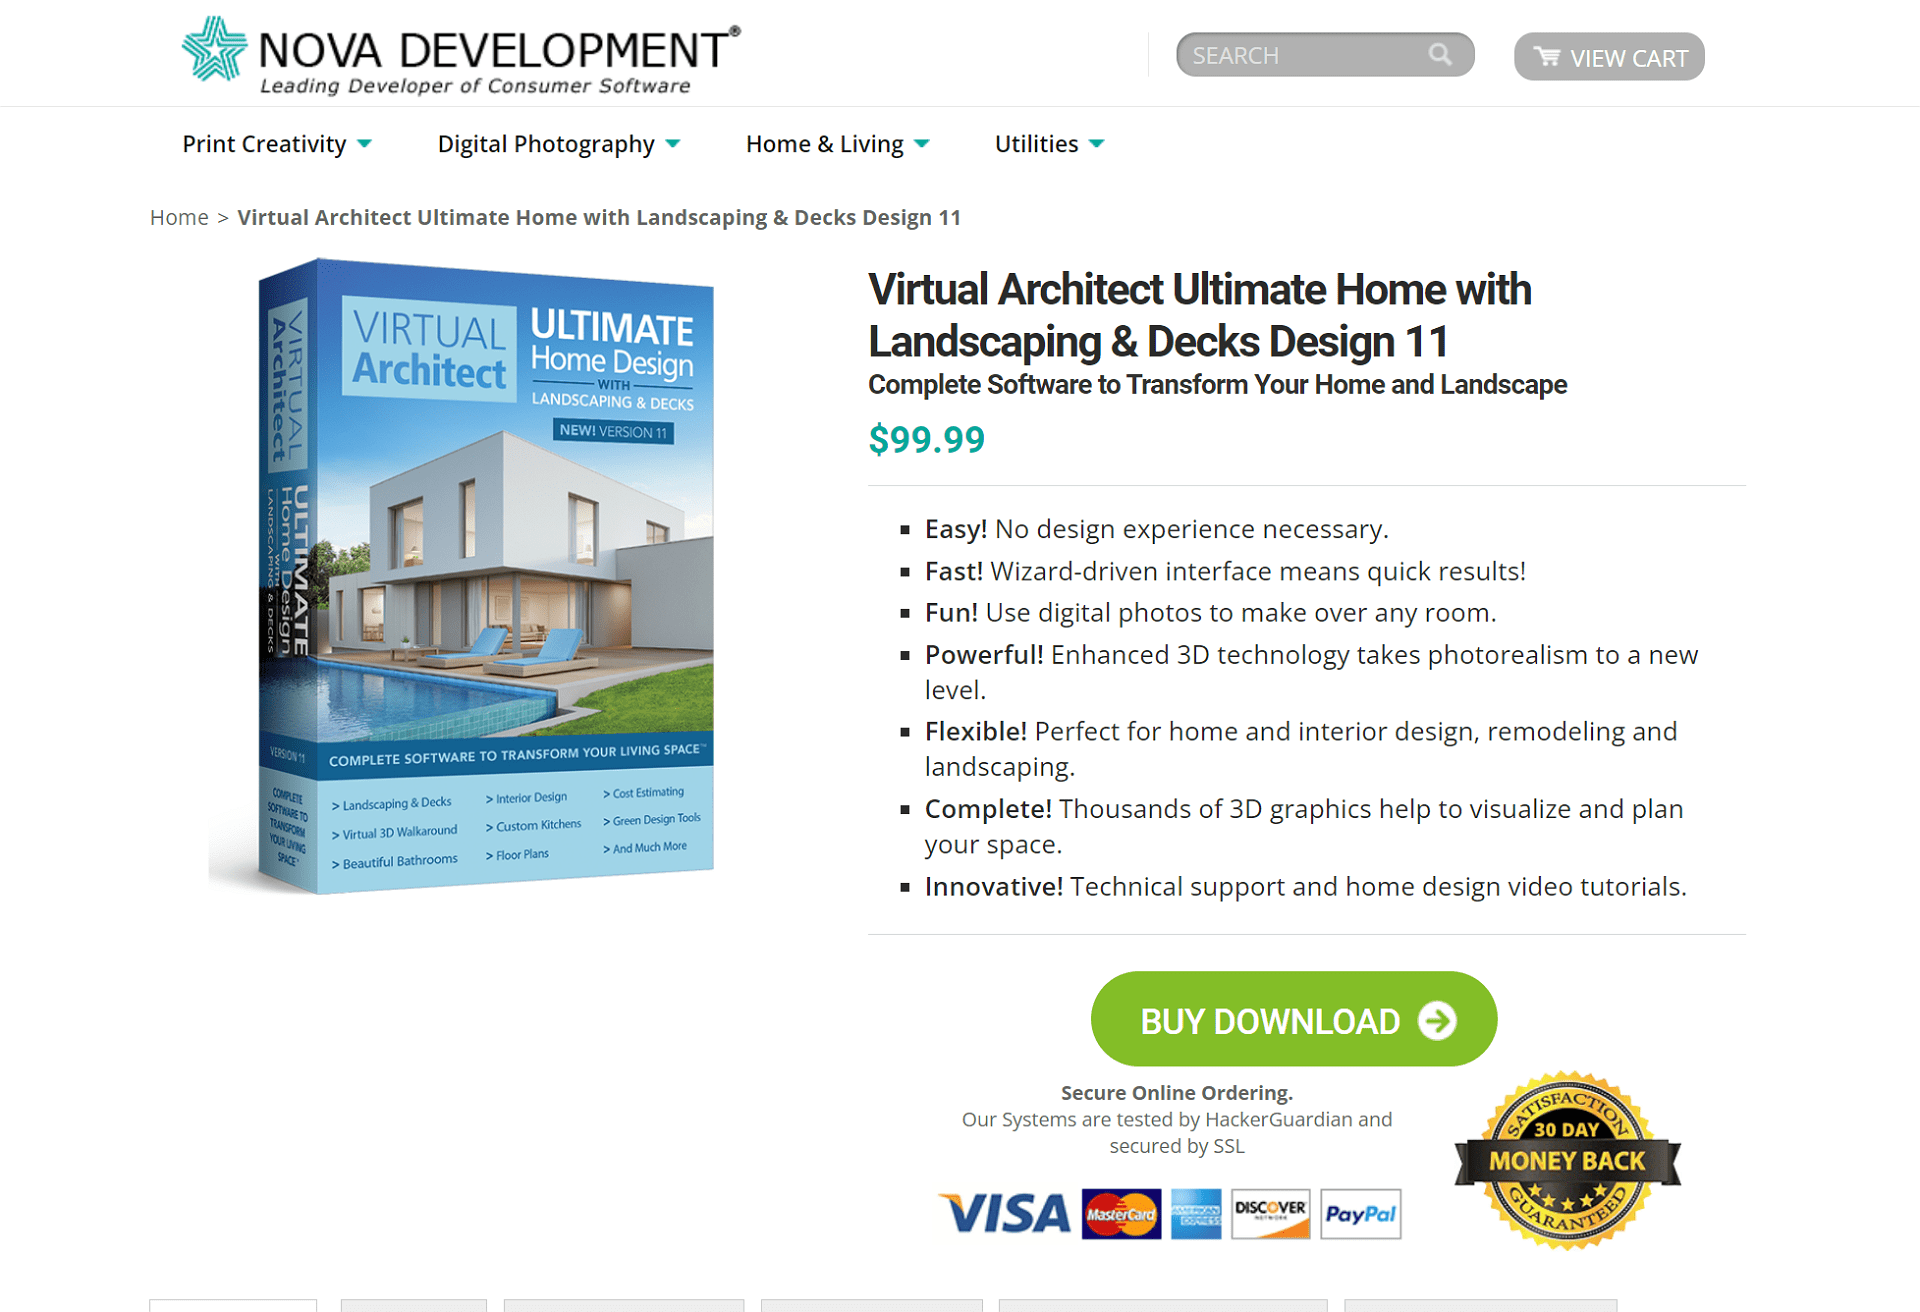 Virtual Architect Ultimate Home Design with Landscaping & Decks 11